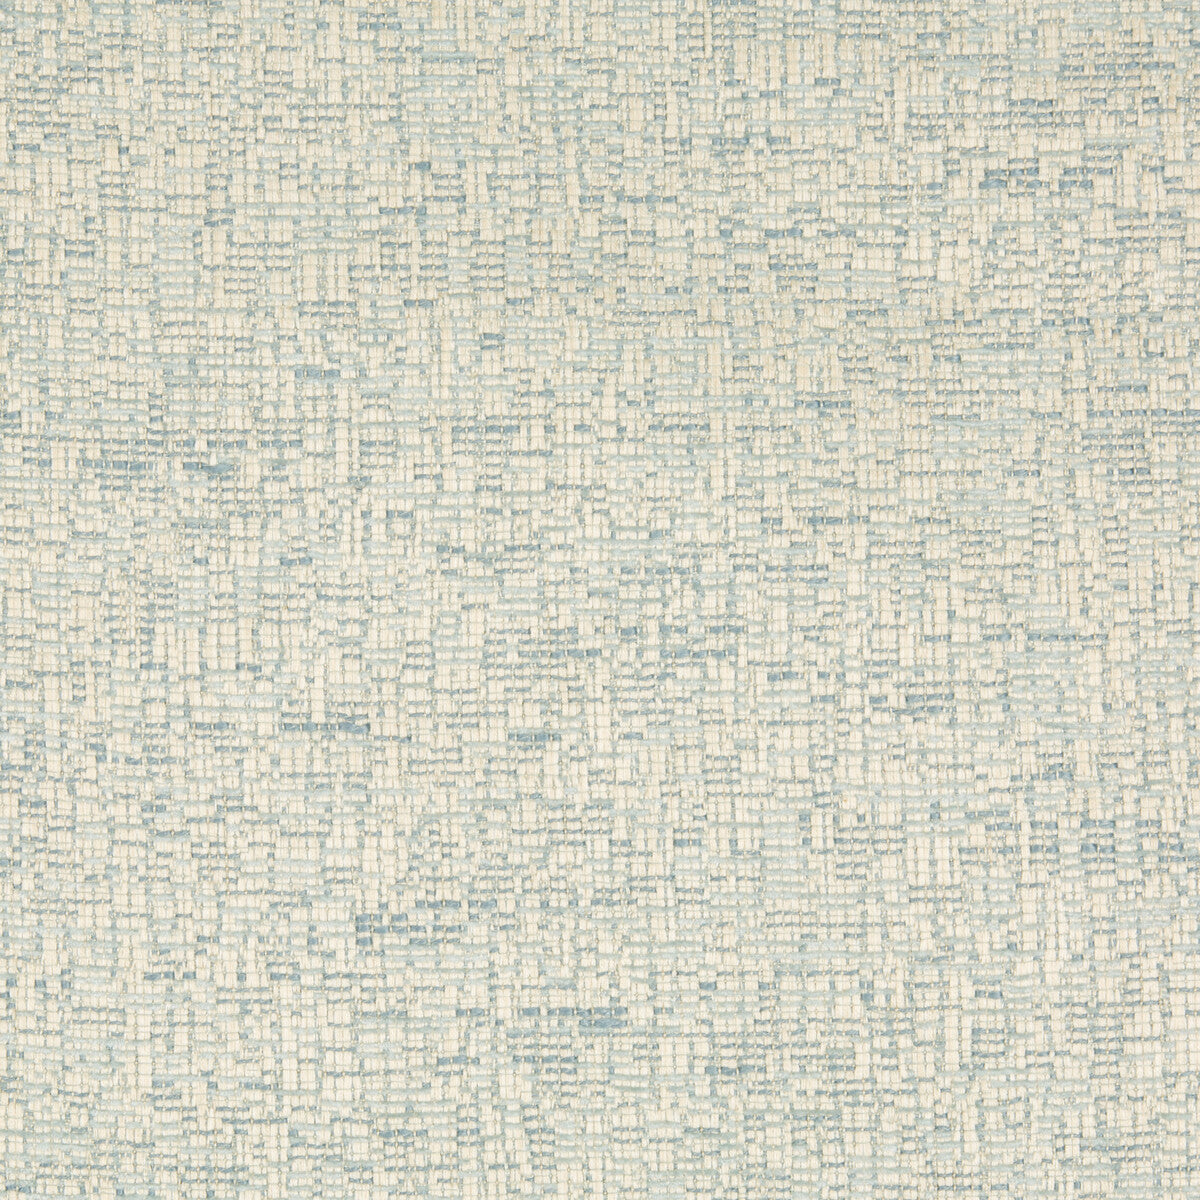 Kravet Design fabric in 34689-115 color - pattern 34689.115.0 - by Kravet Design in the Crypton Home collection